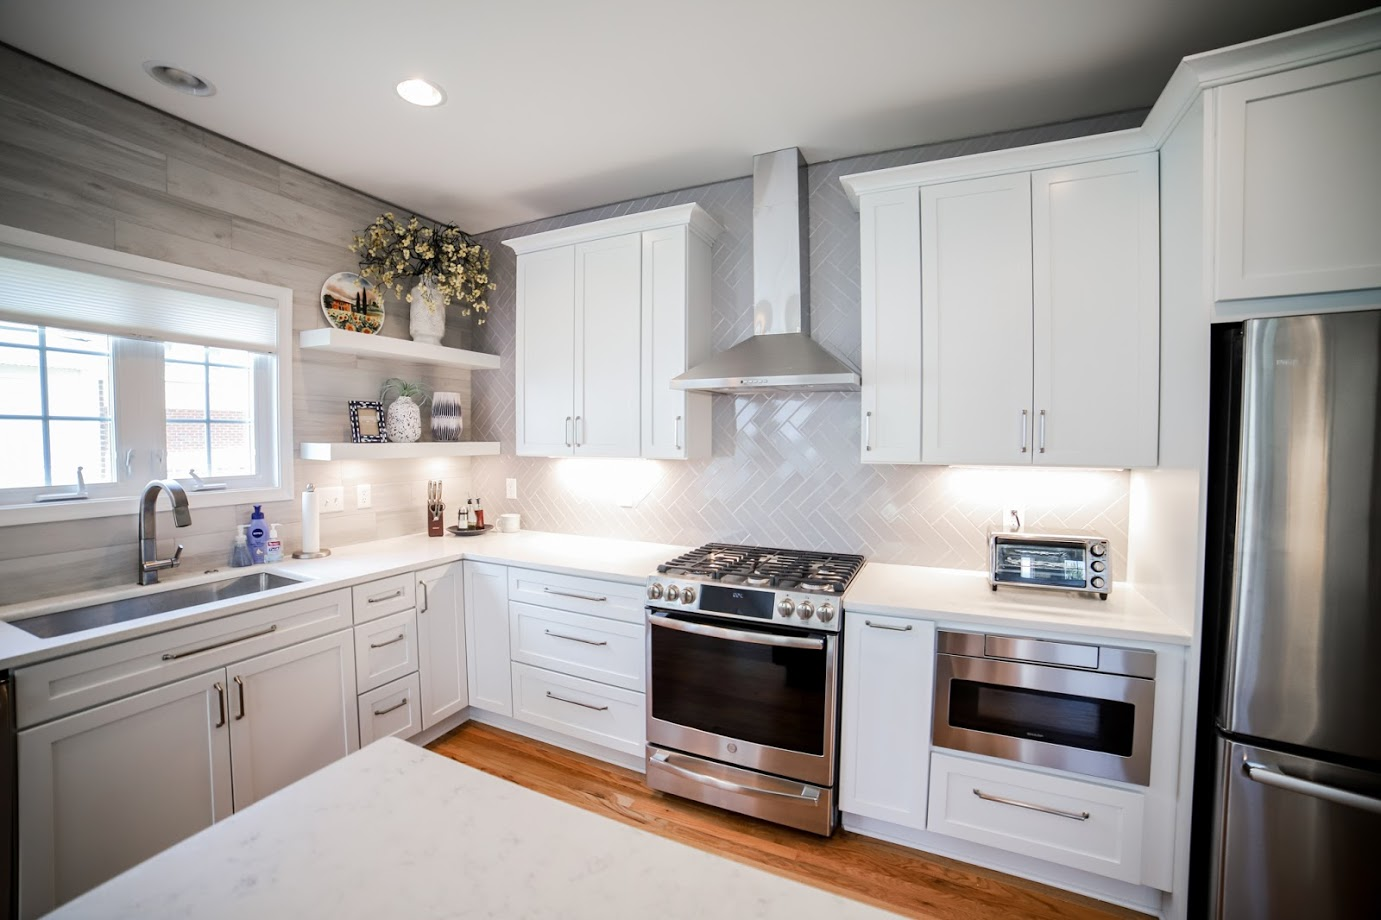 Updated kitchen cabinets and stainless steel appliances featuring a range hood for ventilation